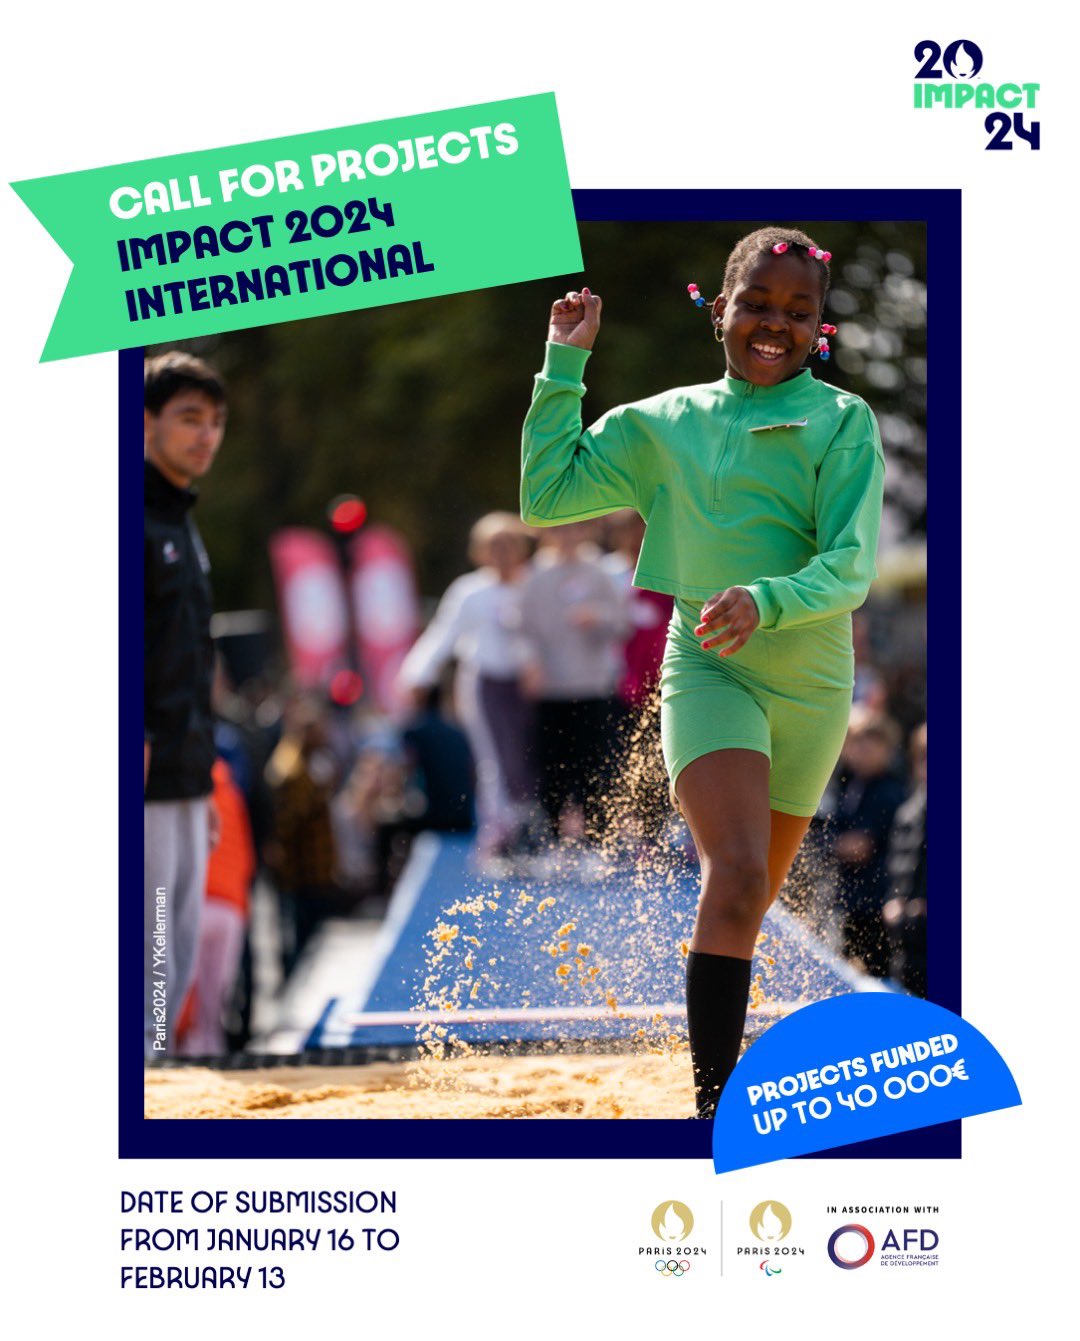 IMPACT 2024 INTERNATIONAL CALL FOR PROJECTS SPORTS DEVELOPMENT